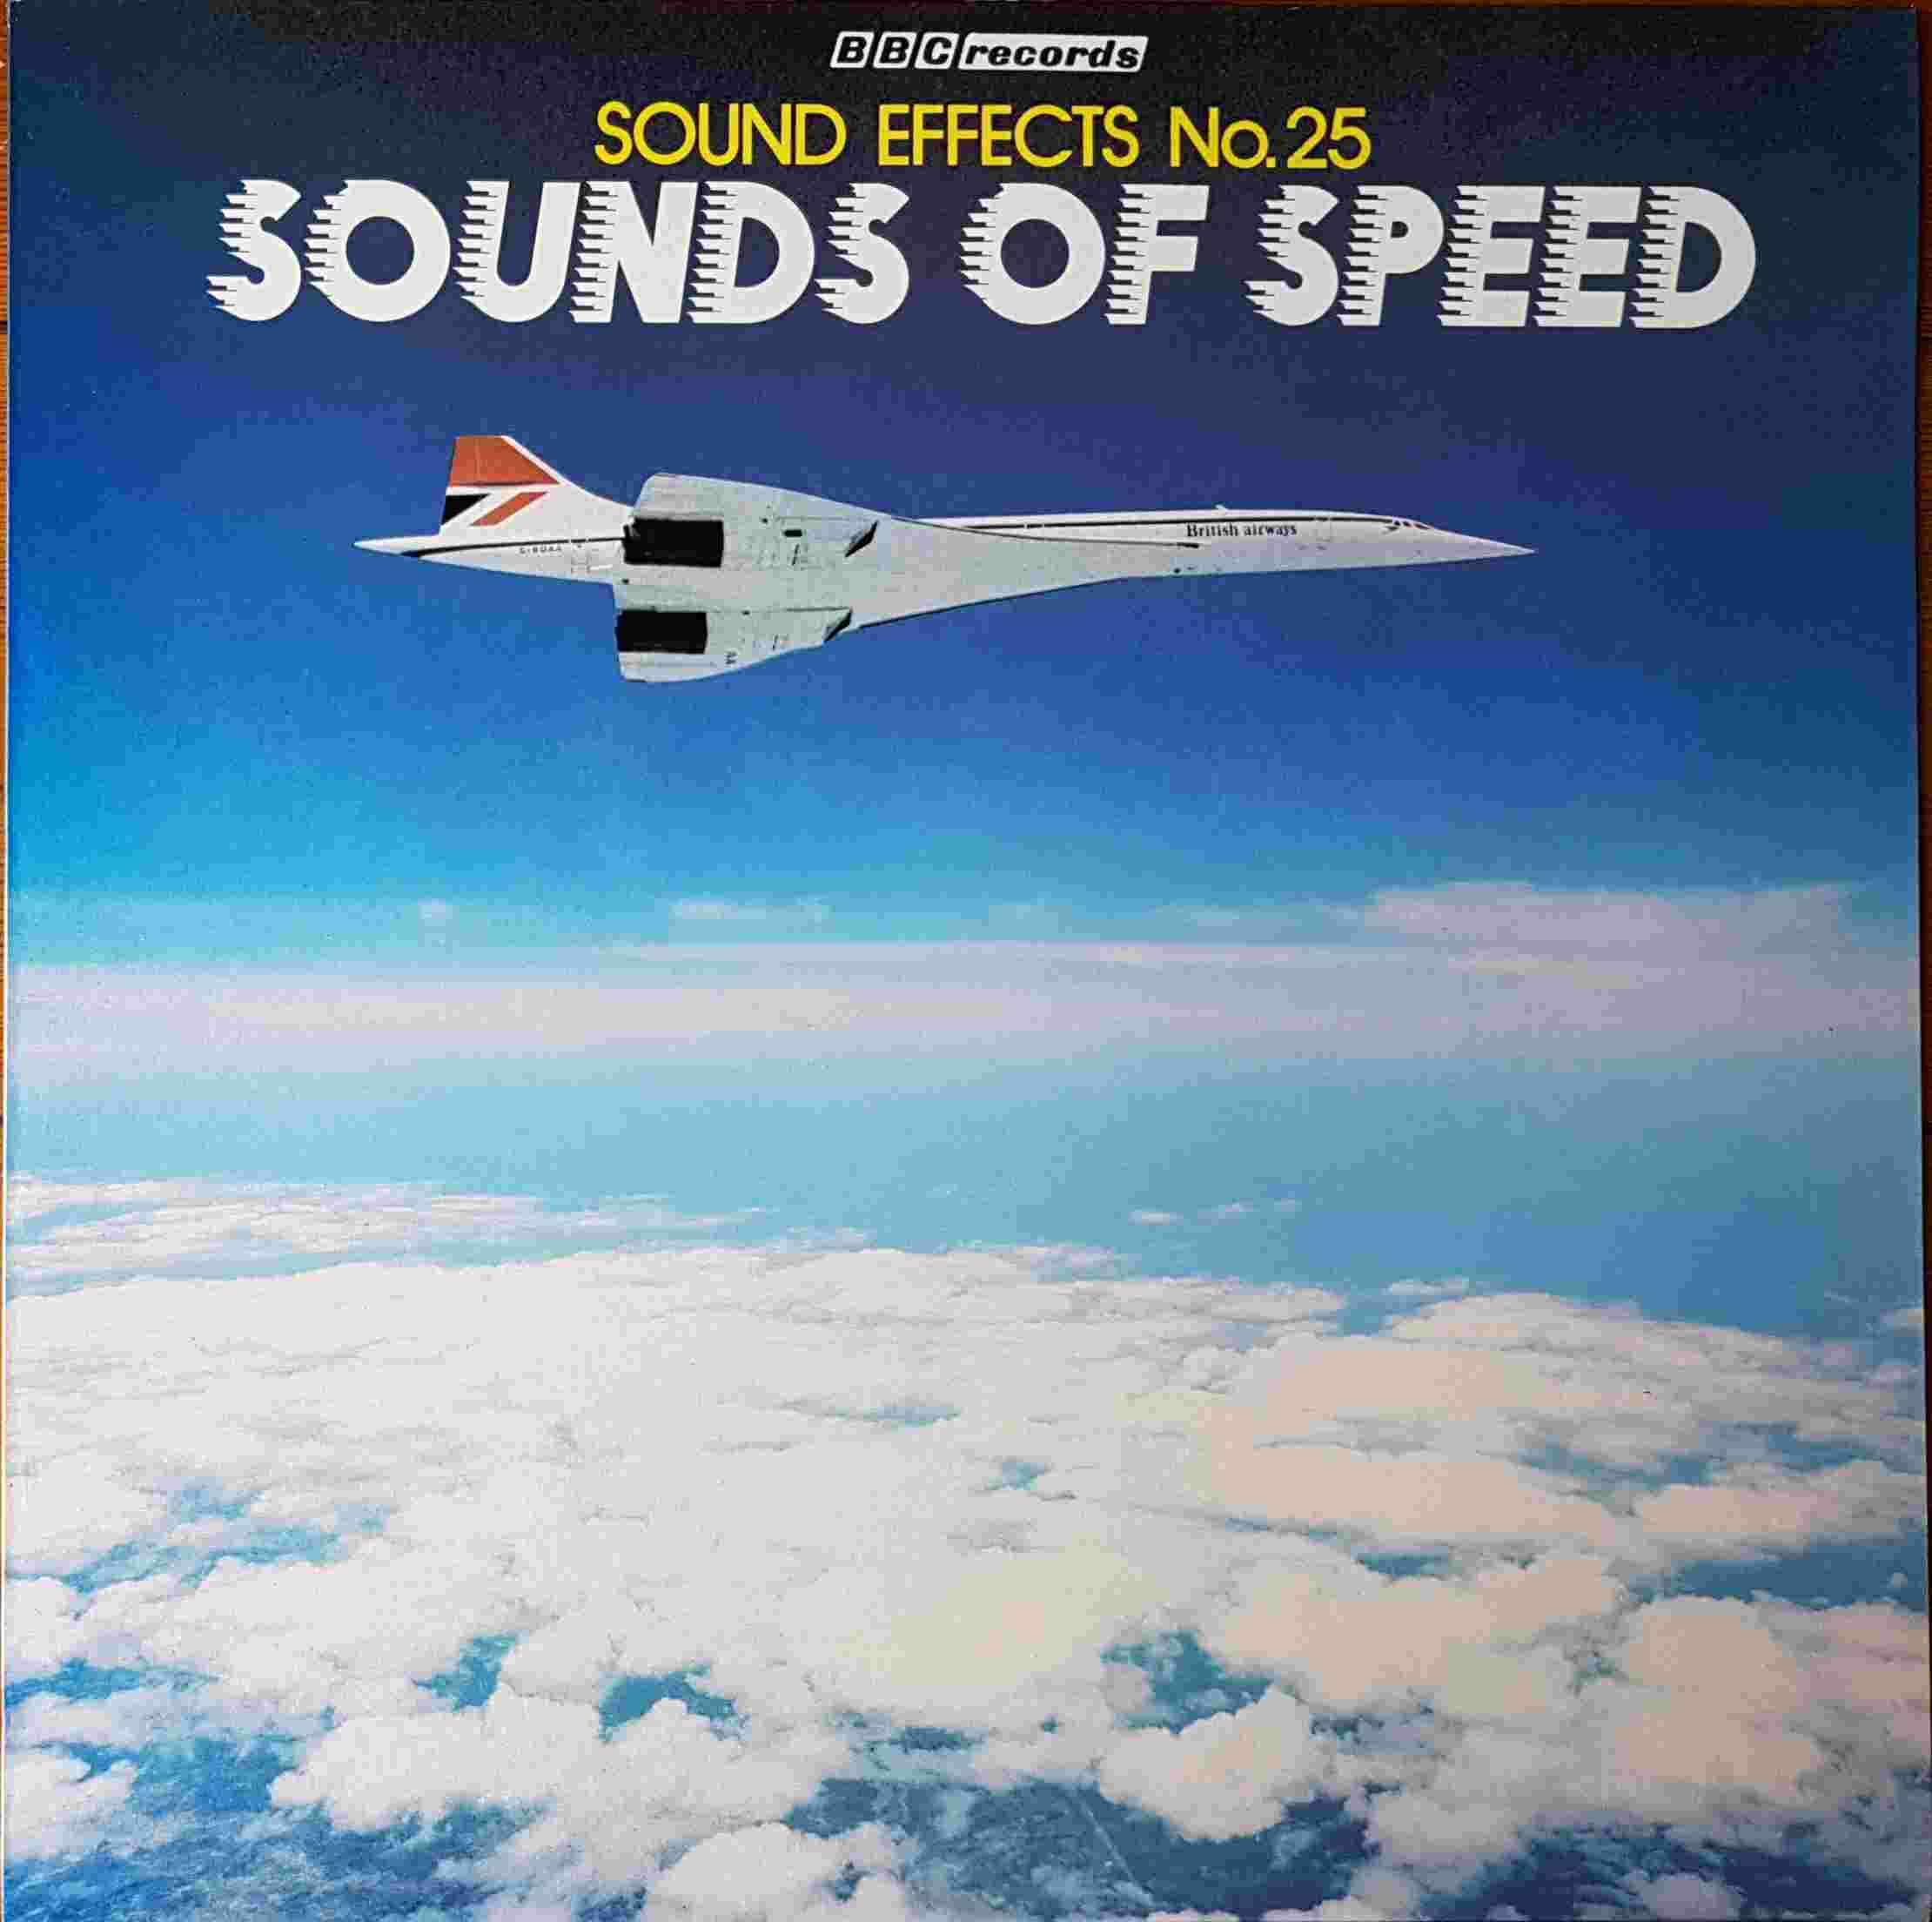 Picture of REC 390 Sounds of speed by artist Various from the BBC albums - Records and Tapes library